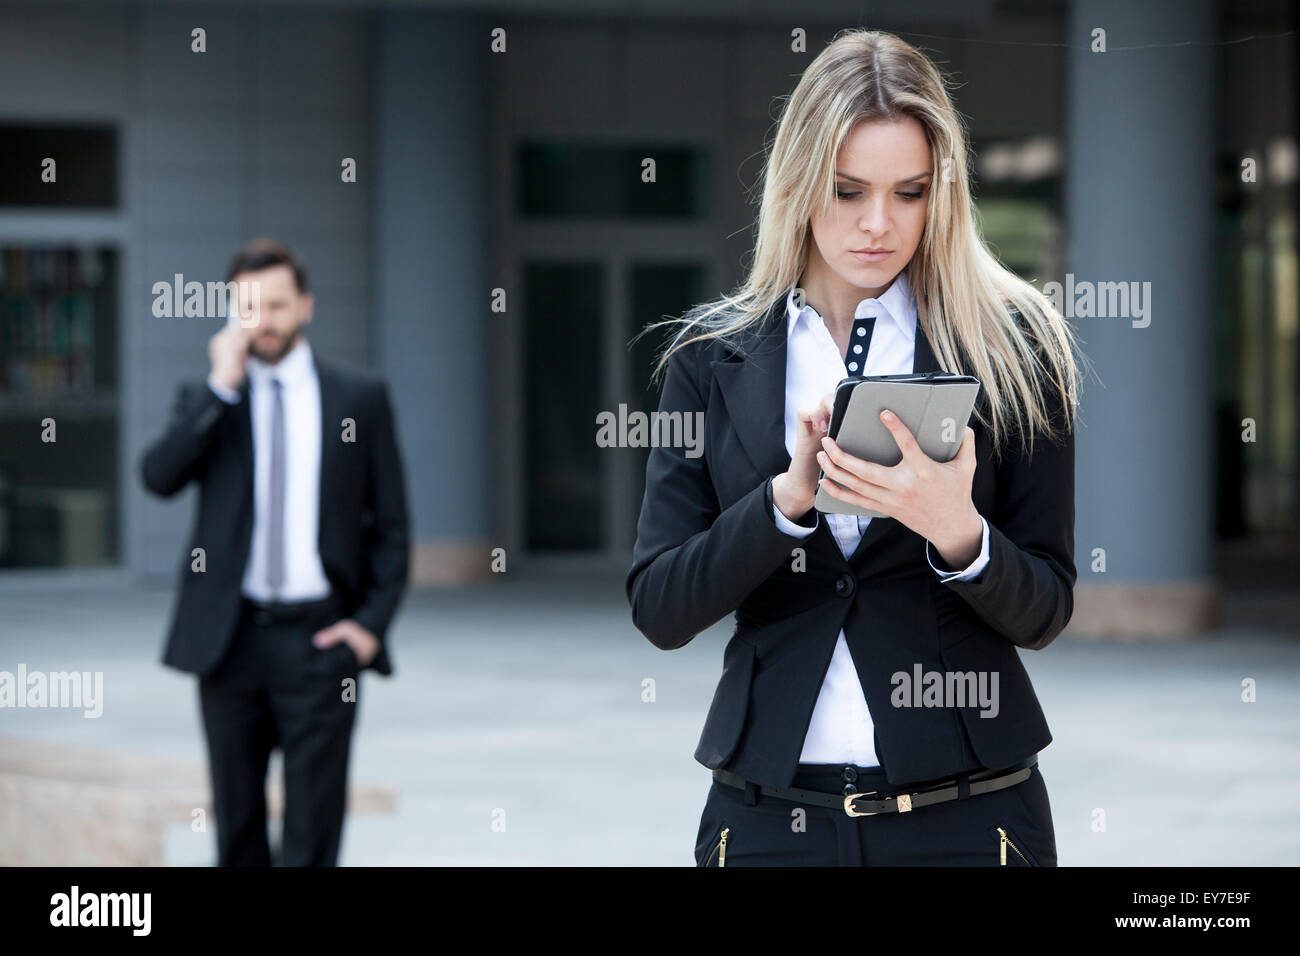 Business woman using digital tablet outdoors Stock Photo